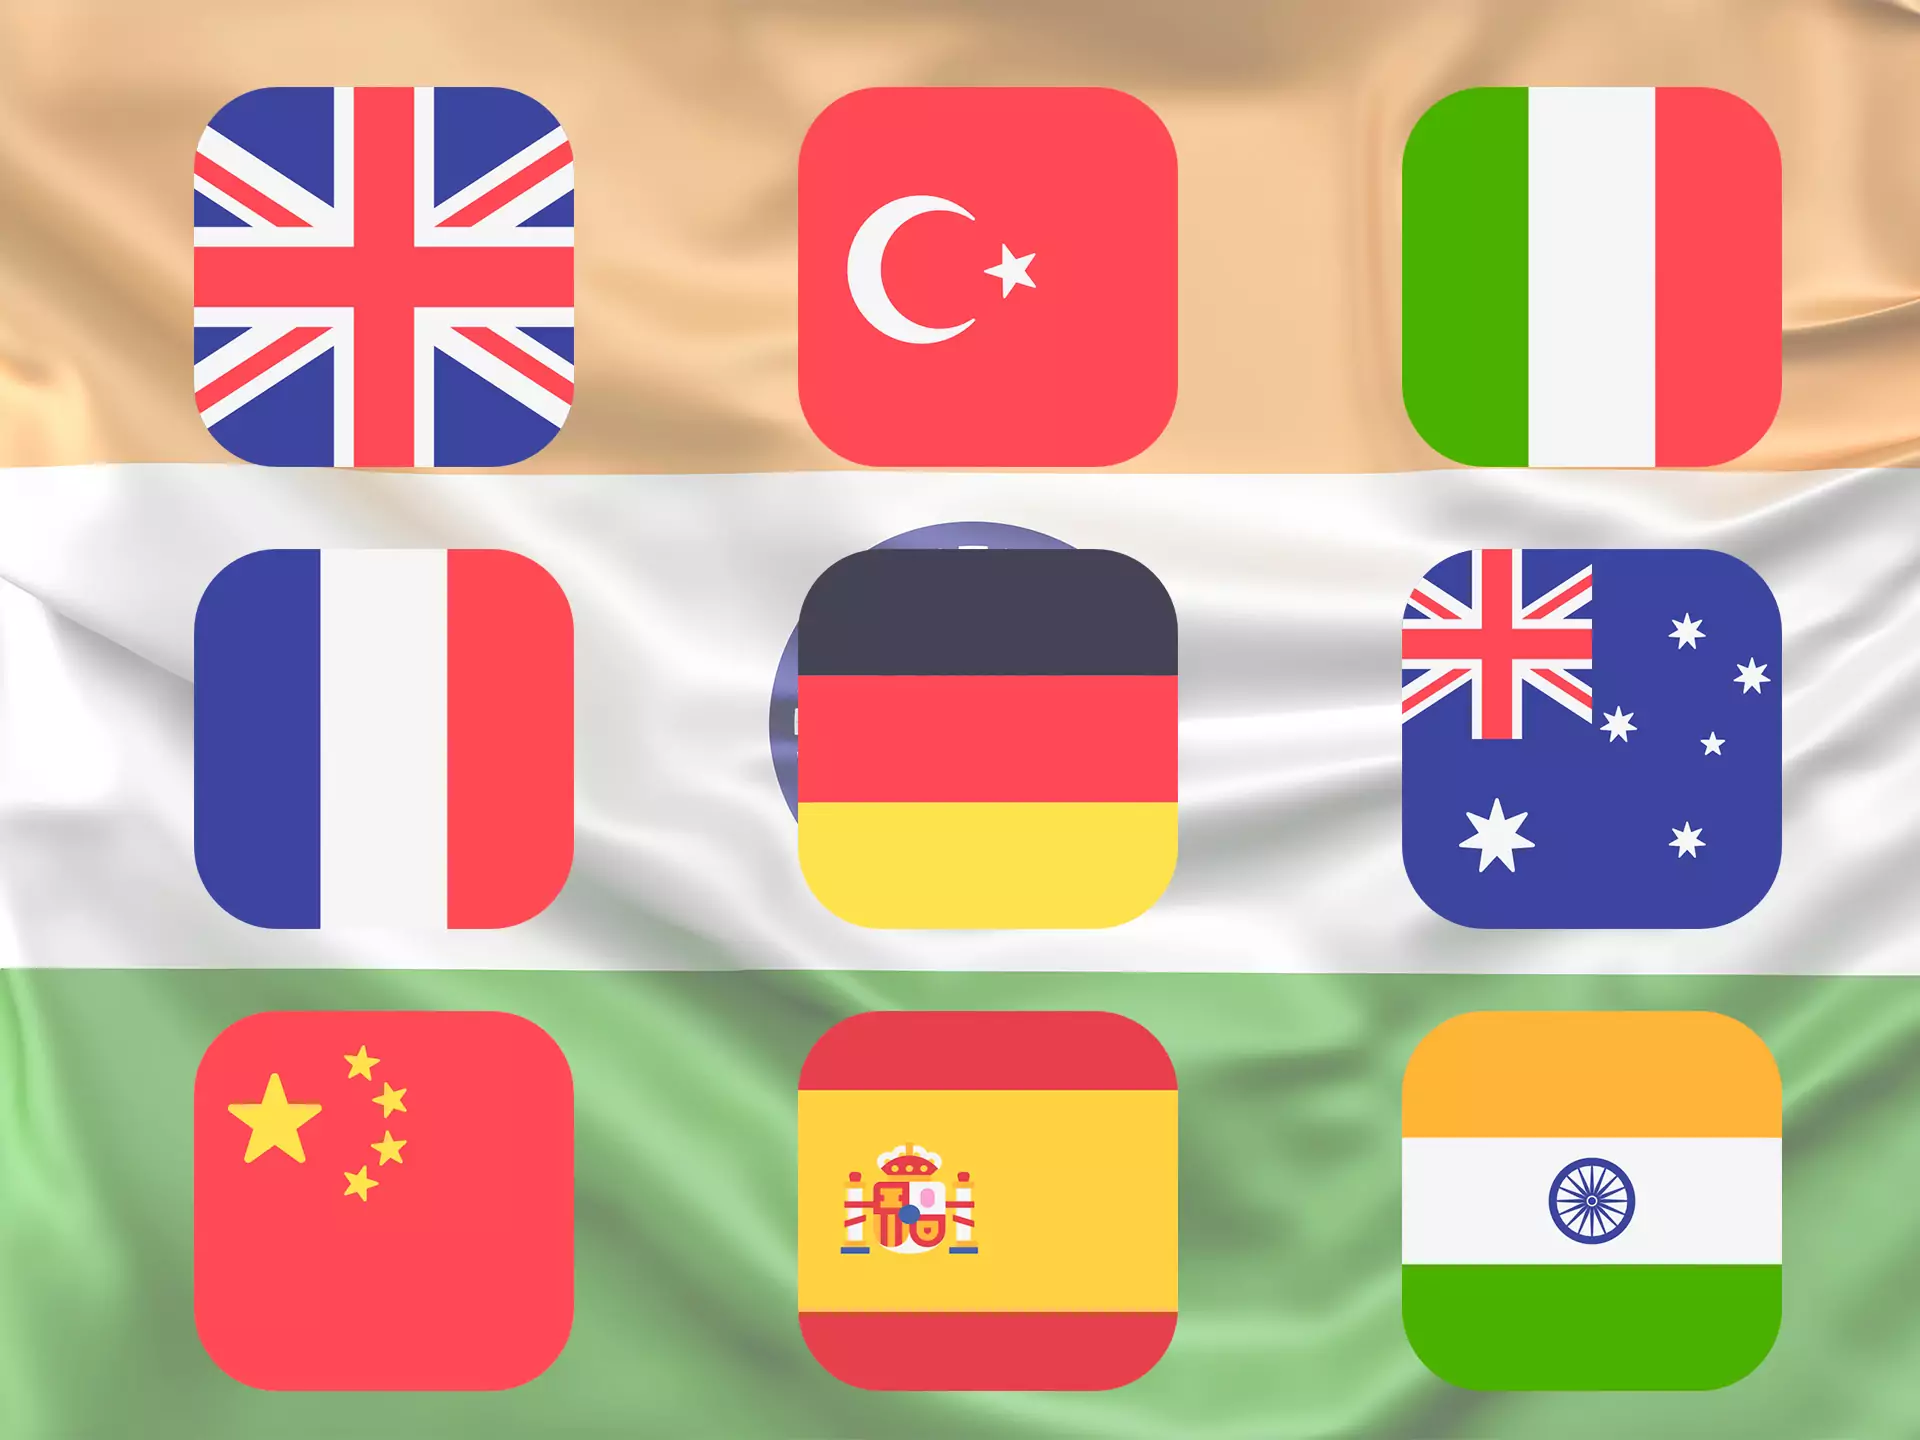 Betwinner supports Hindi and you can choose this language on the official website.